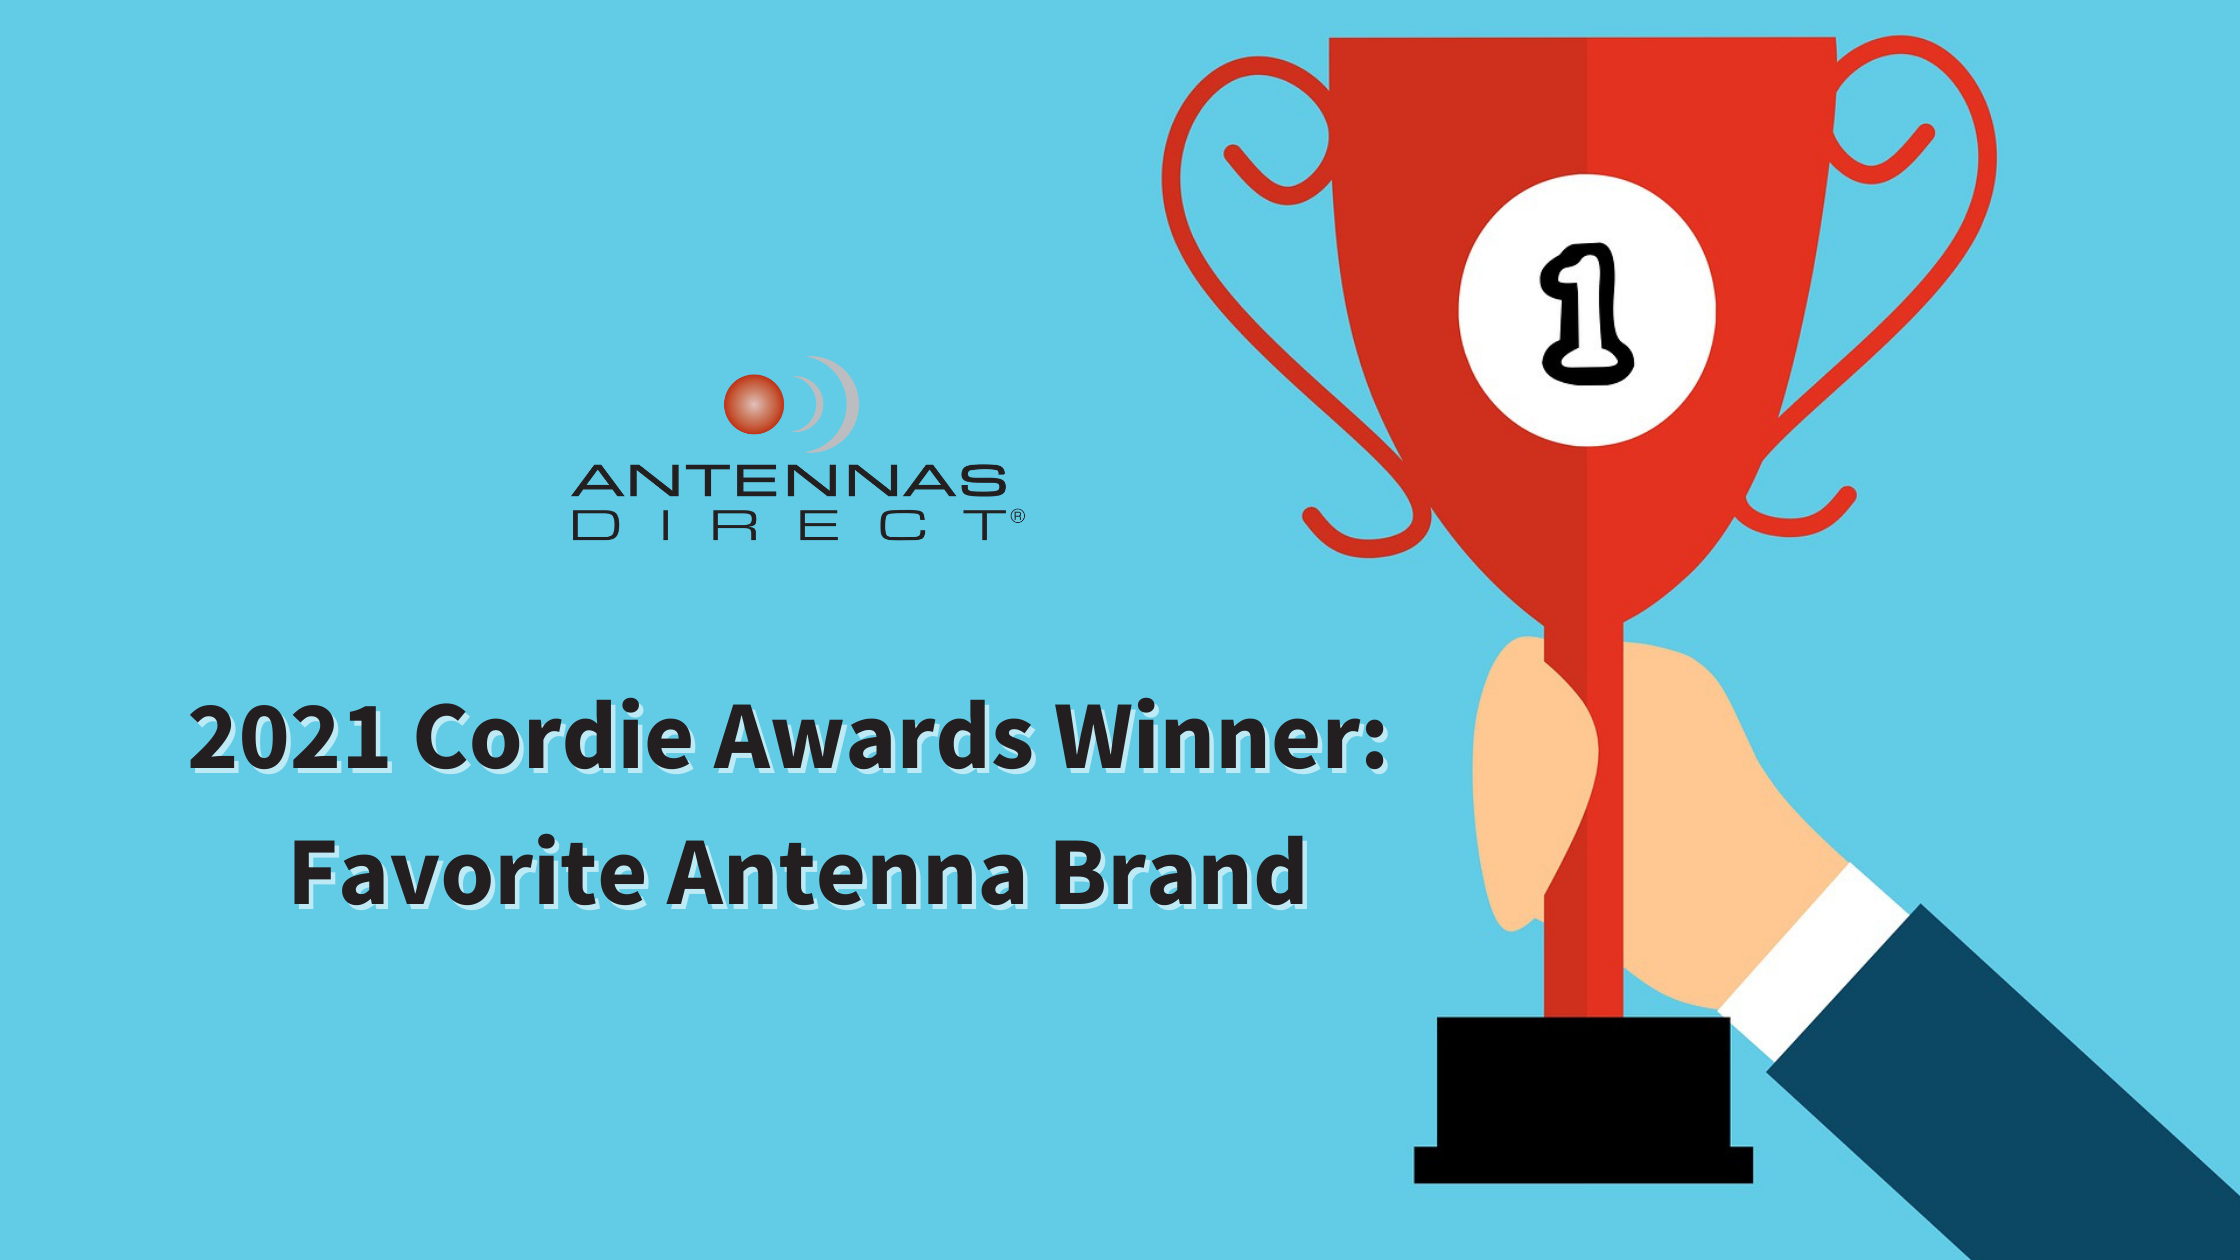 Antennas Direct Named the Cordie Awards Favorite Antenna Brand for 2021, hand holding trophy